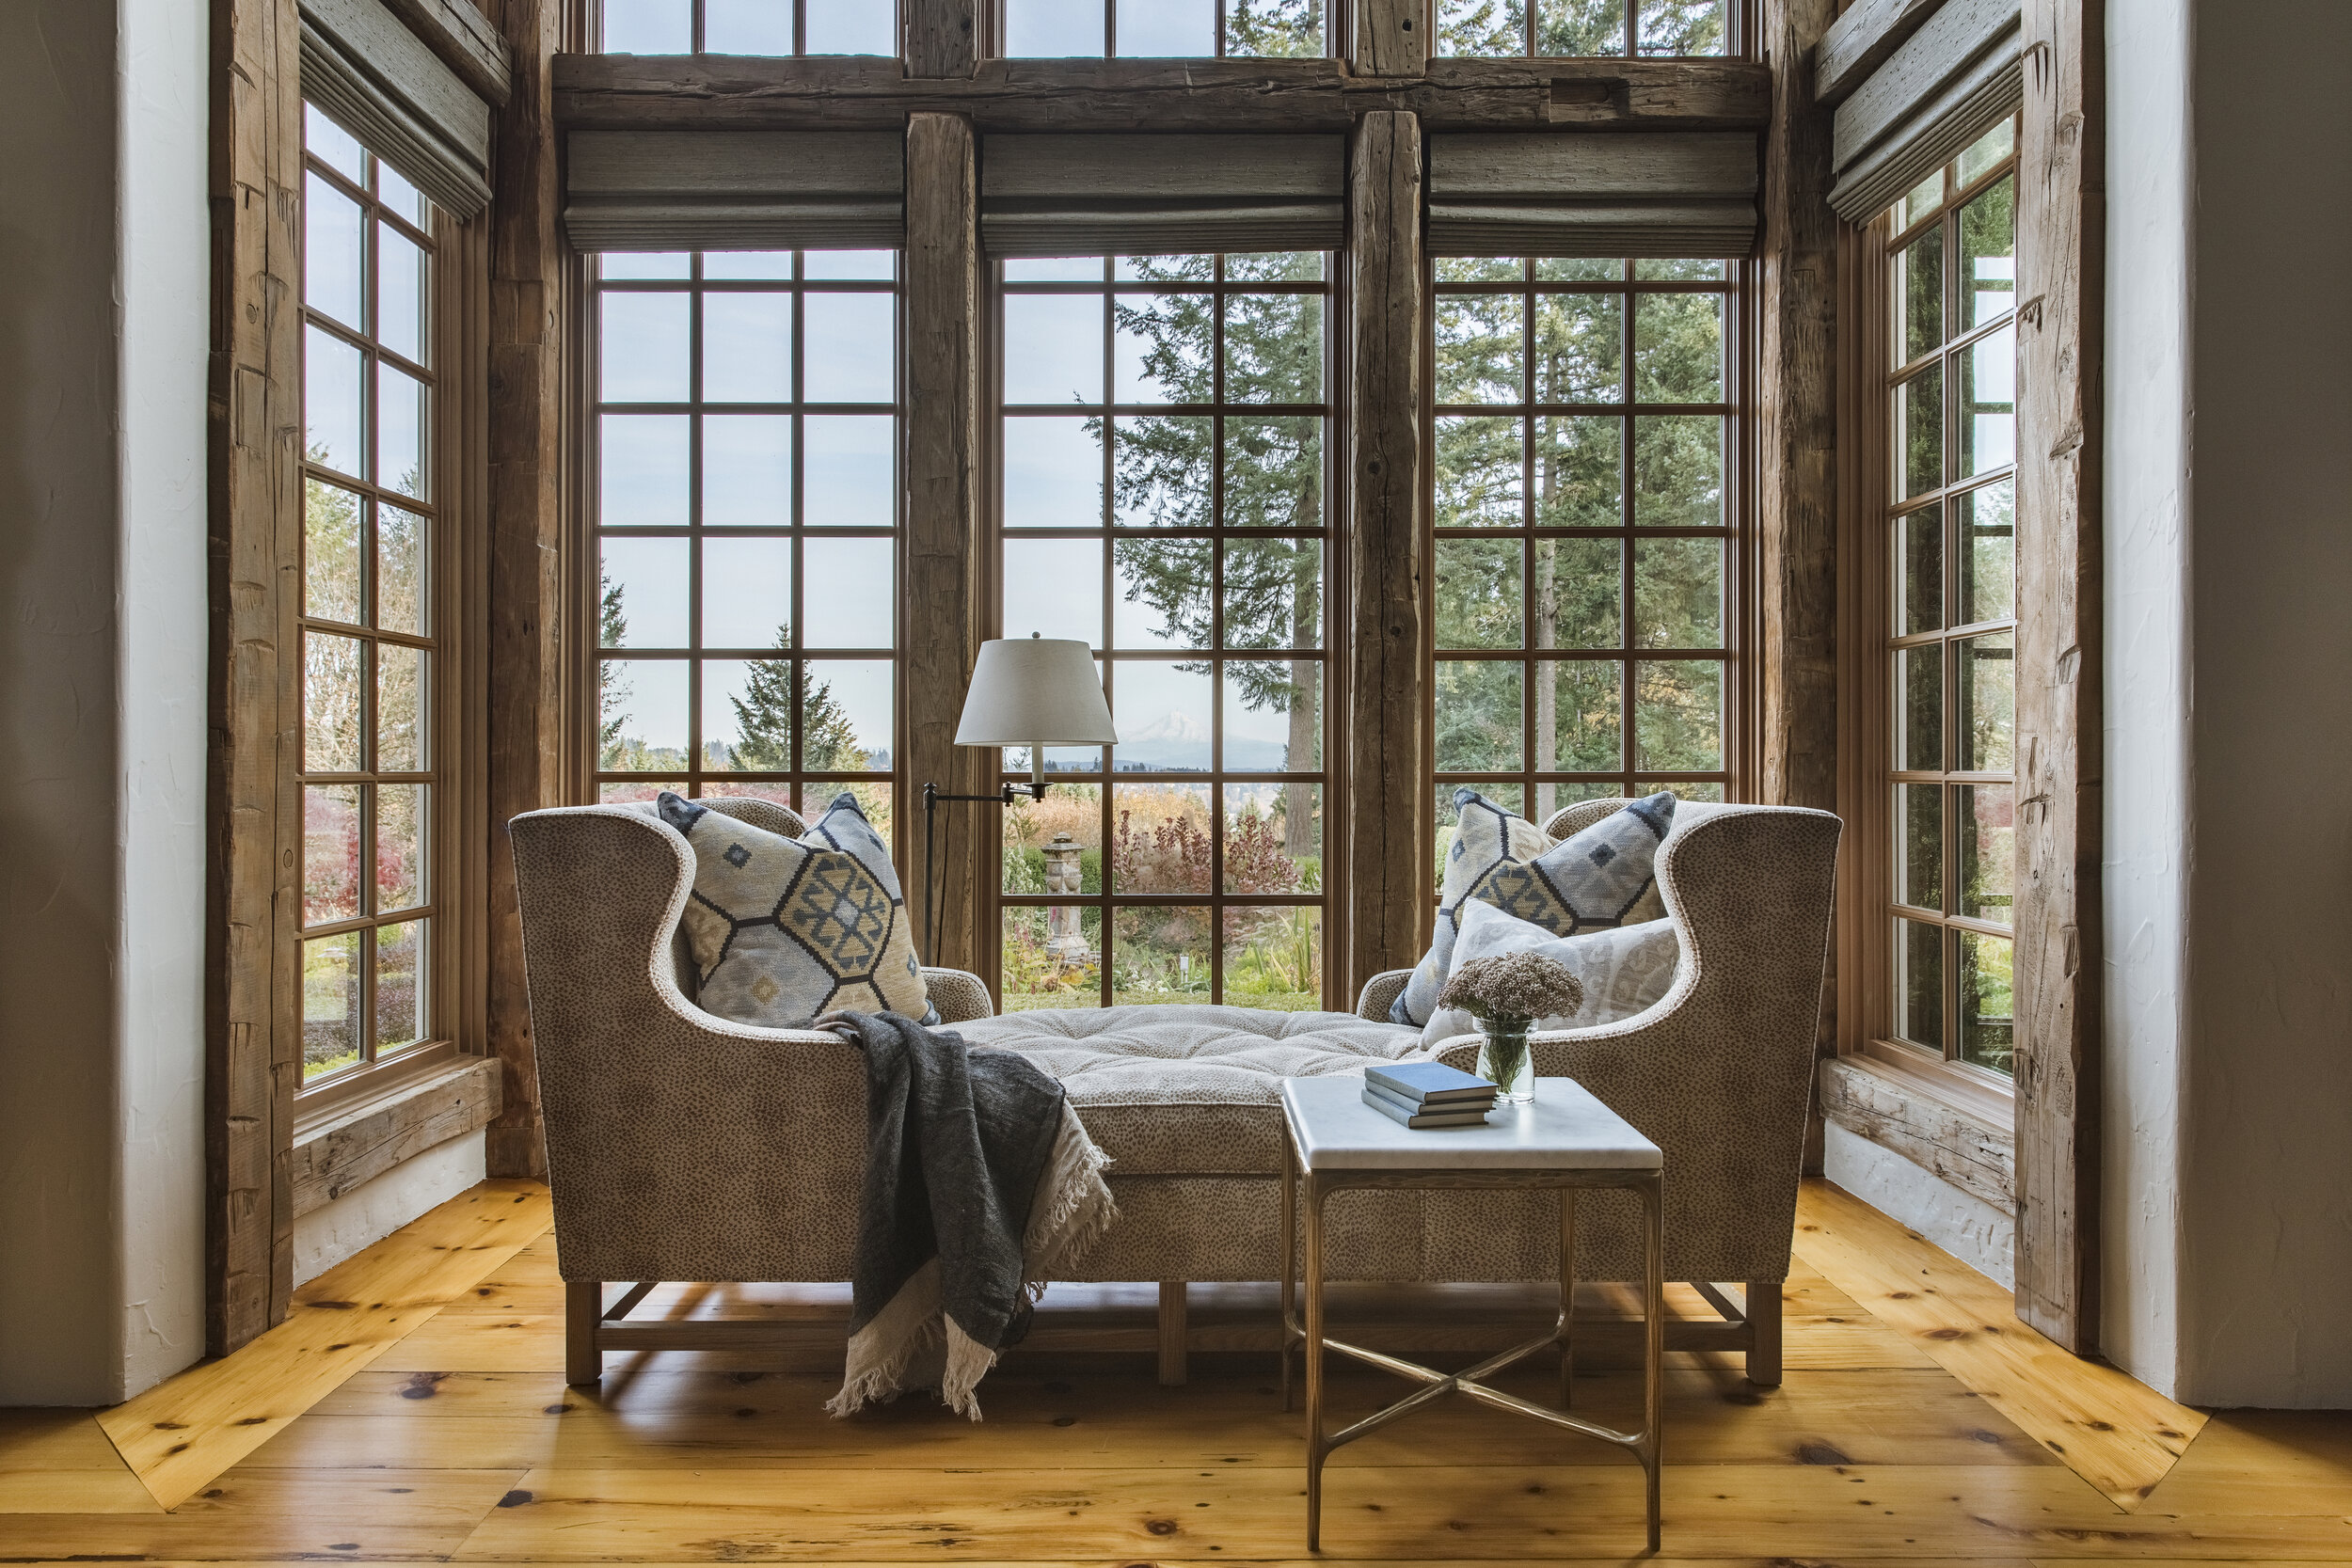  A double-wingback chaise anchors the living room’s double-height bay window, while built-in shelving along an opposite wall frames the new library space. “This room was so big, but they only used a small portion of it,” Nesen says. “We really wanted